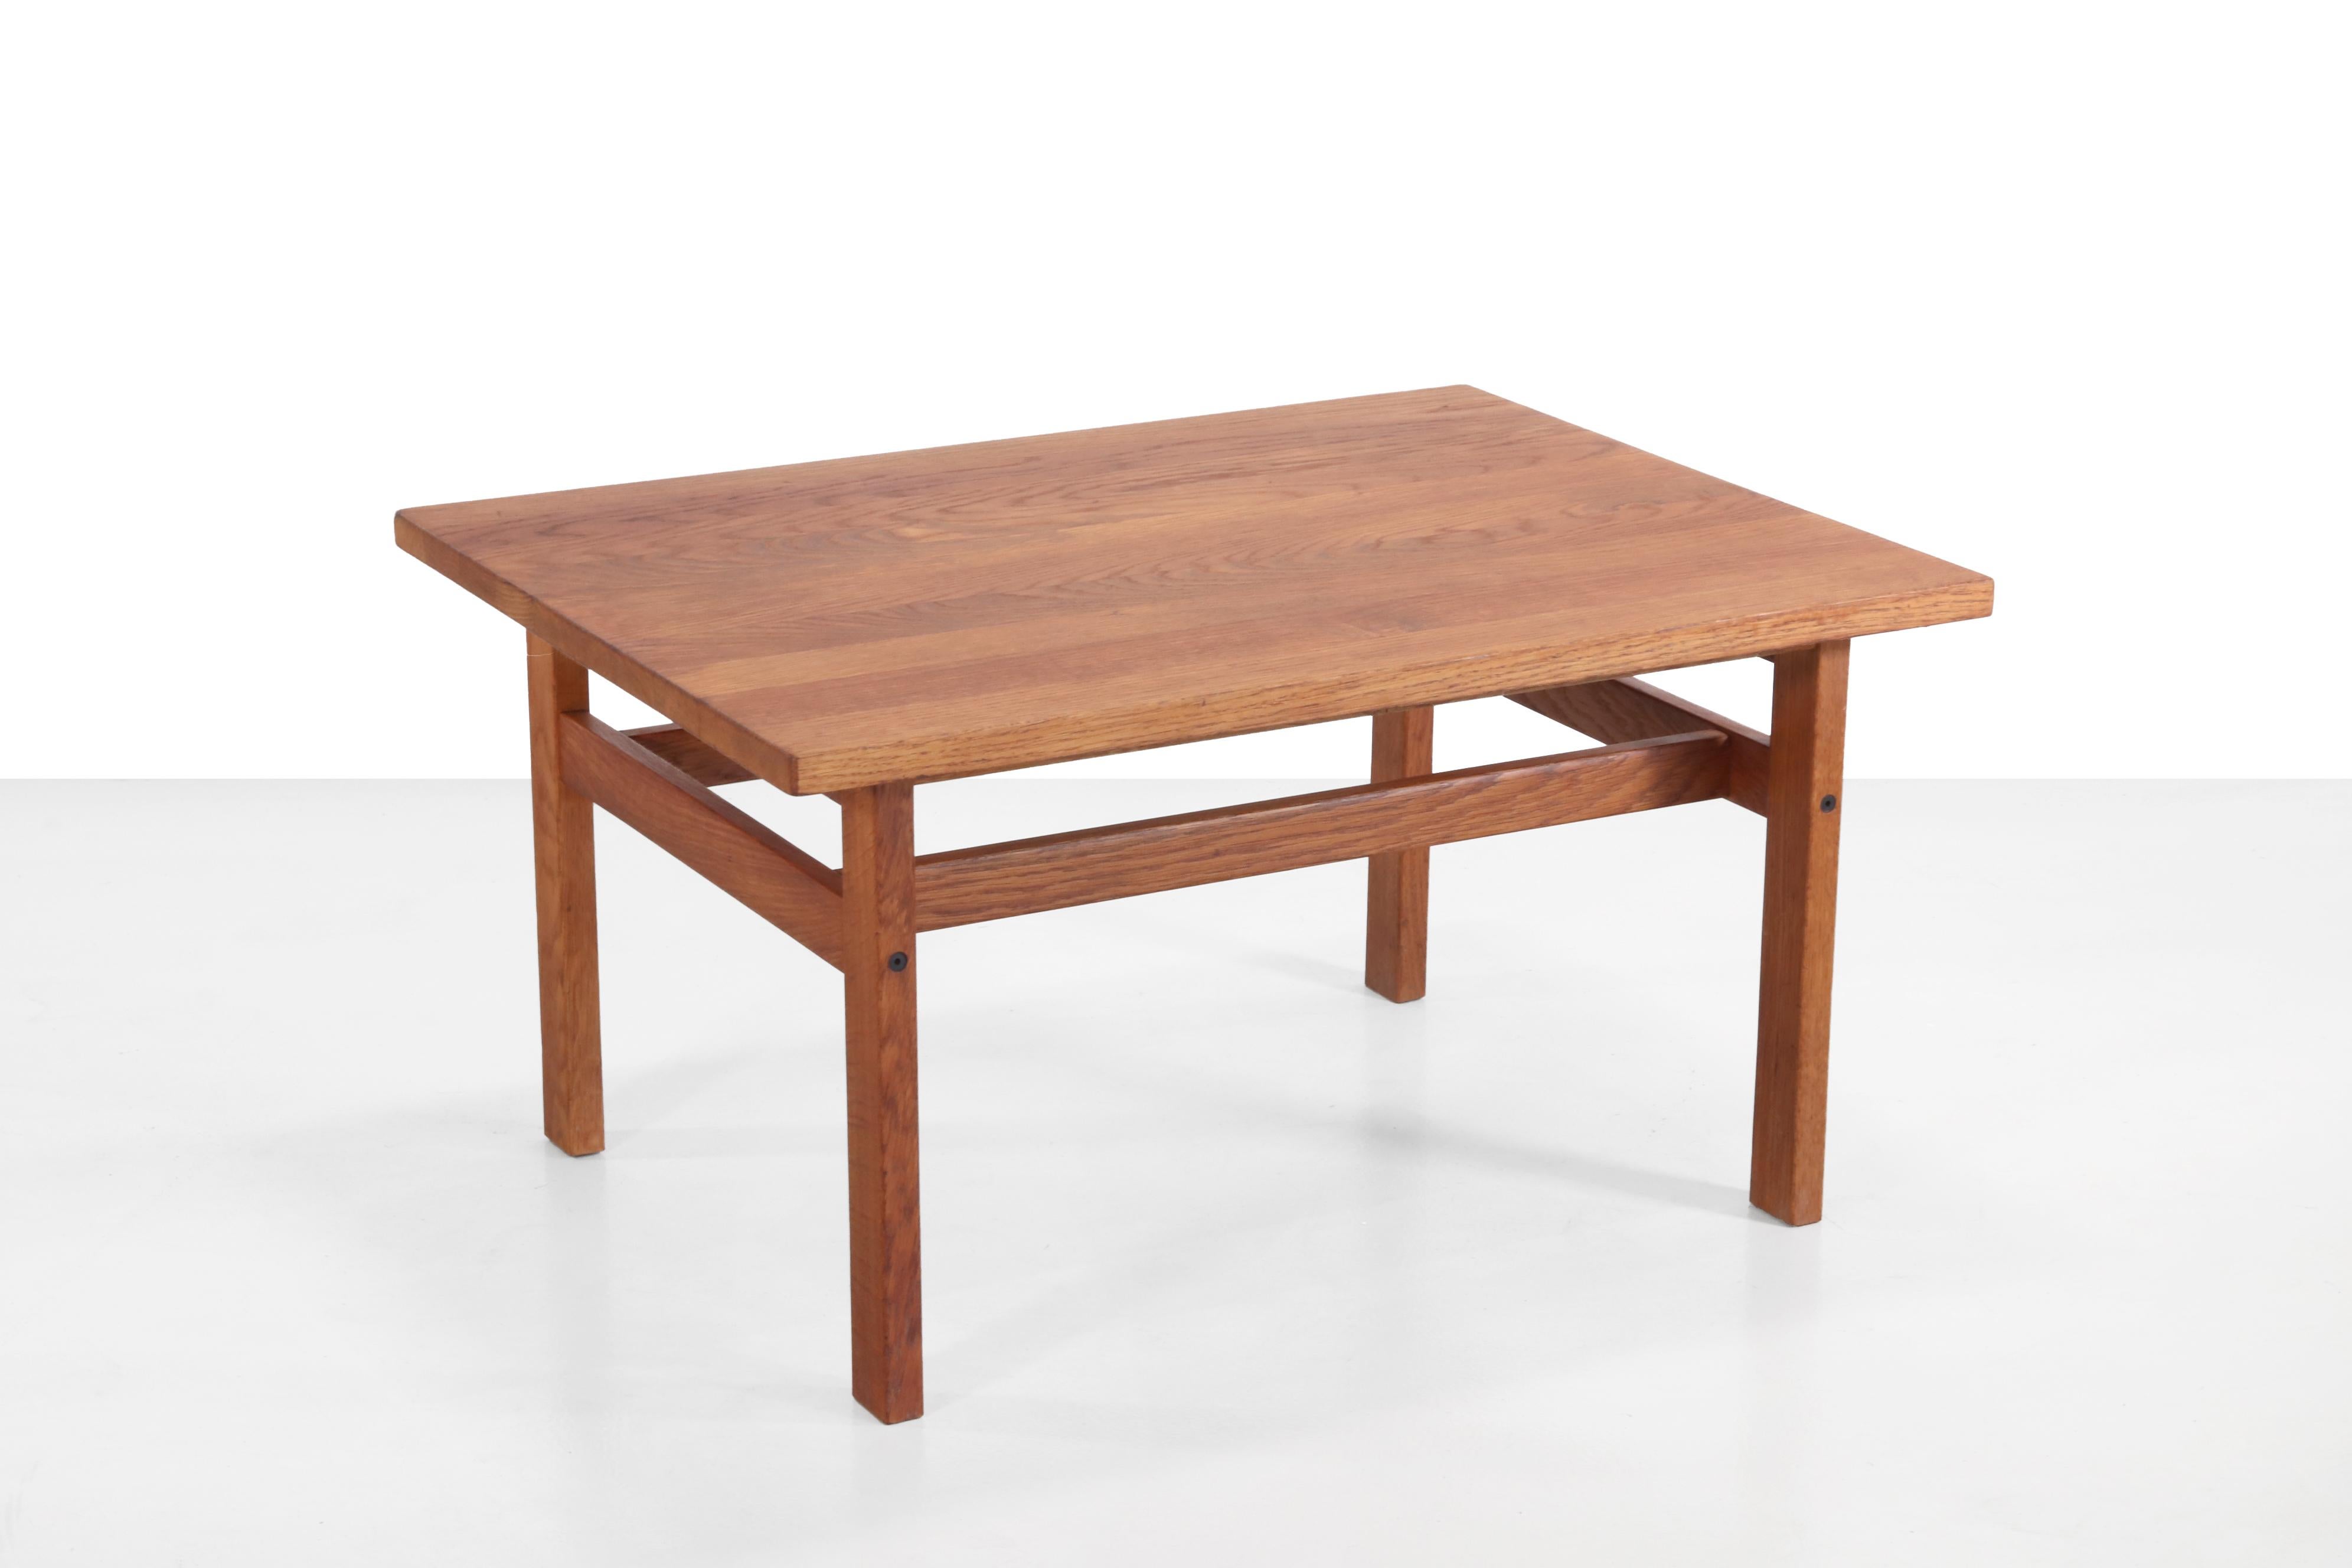 Danish Solid Oak Coffee Table or Sidetable by FDB Mobler Model No.240, 1950's Denmark For Sale